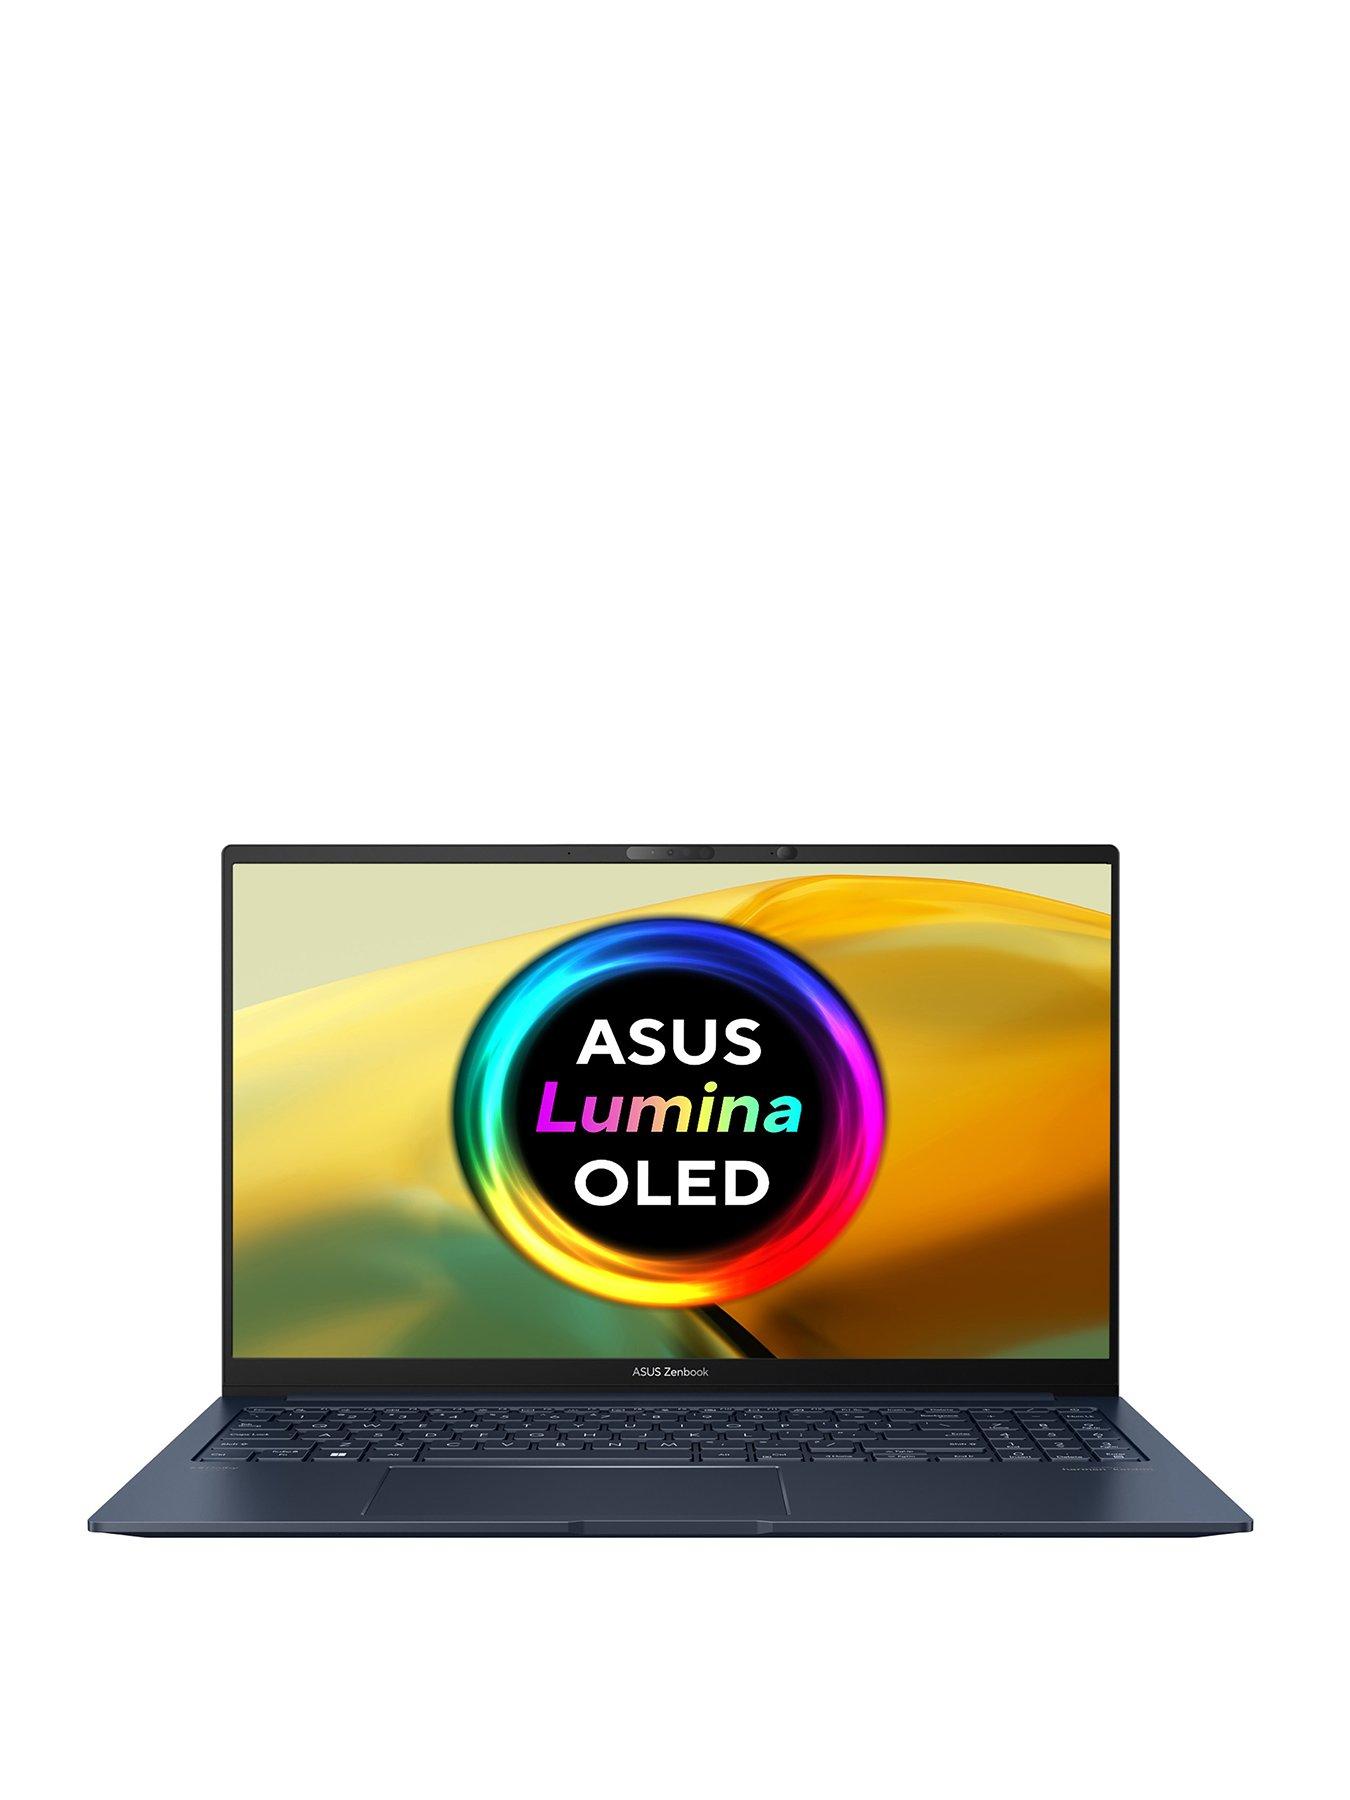 ASUS 2022 Newest Vivobook 17 Laptop, 17.3 Full HD 1080P Non-Touch Display,  Intel Core i3-1115G4 Processor, 12GB DDR4 RAM, 512GB PCIe SSD, Backlit